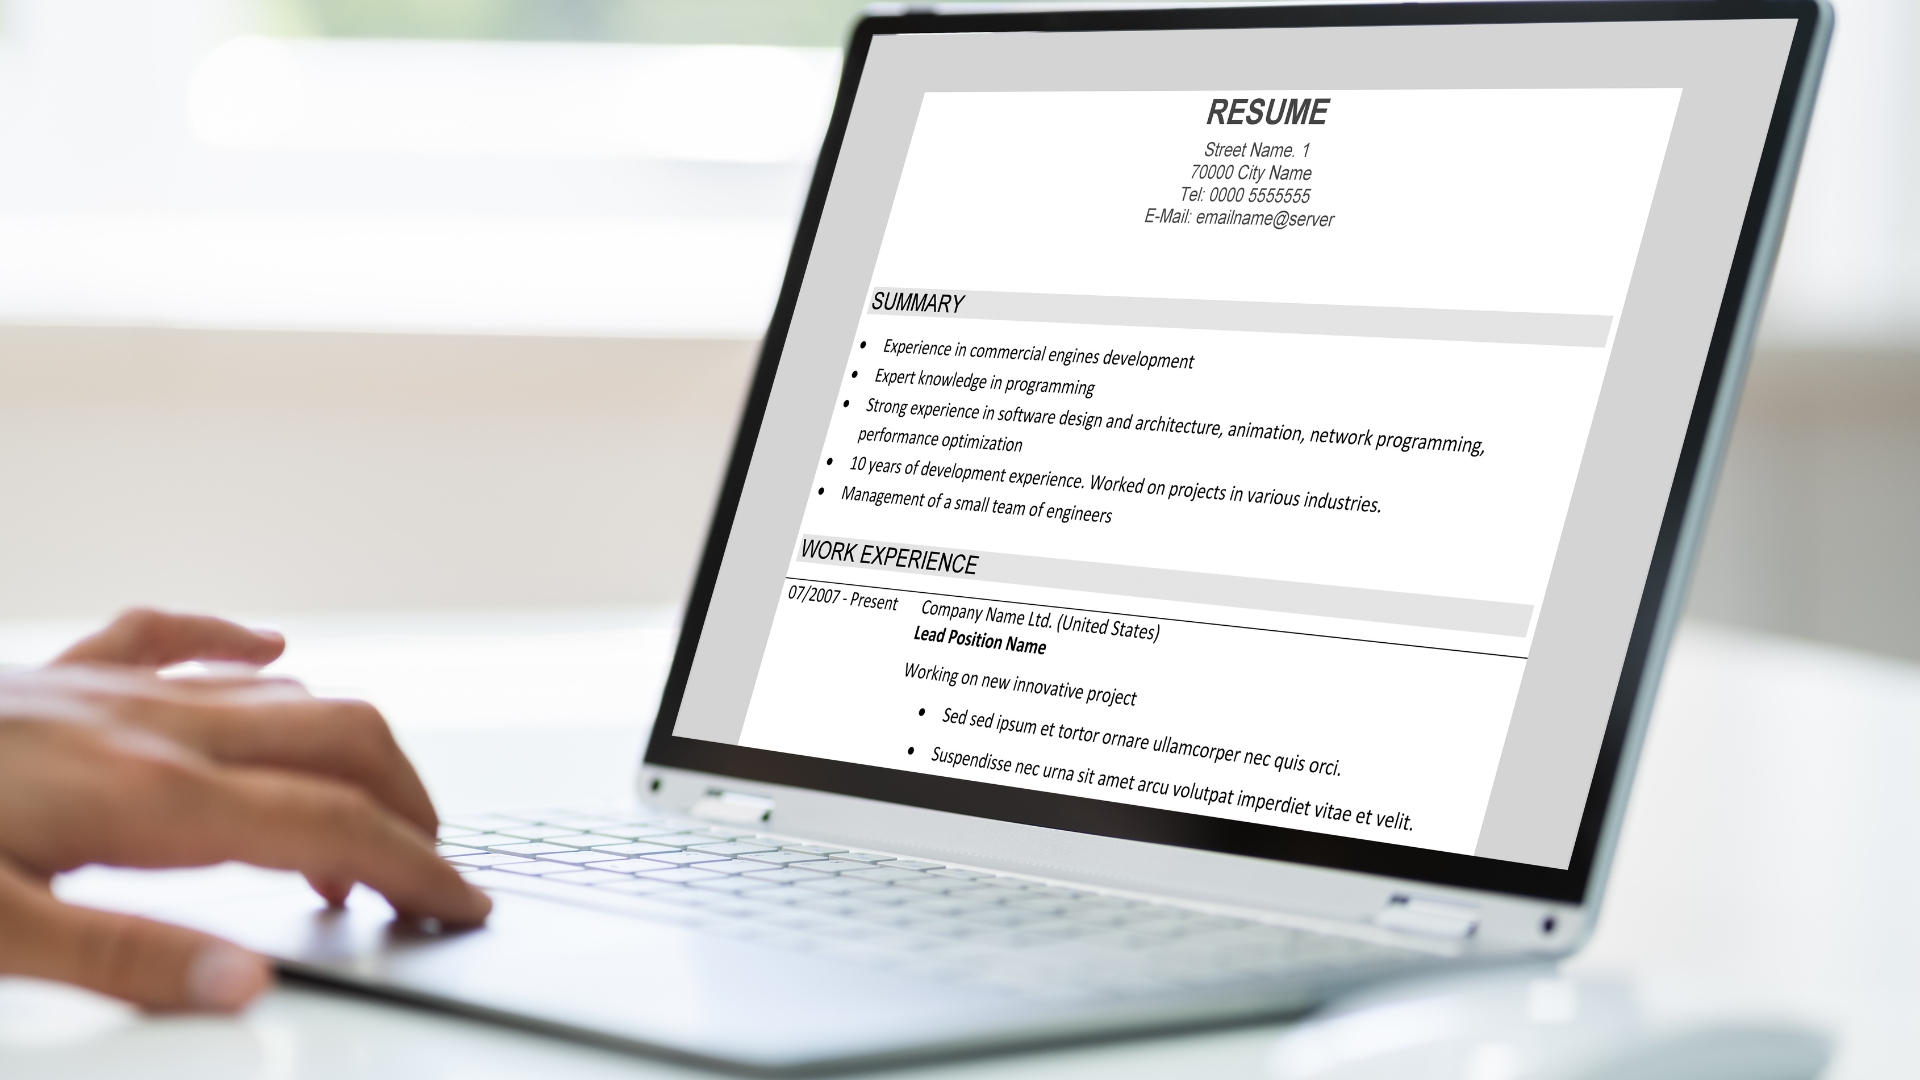 Additional resources and tools for crafting the perfect resume